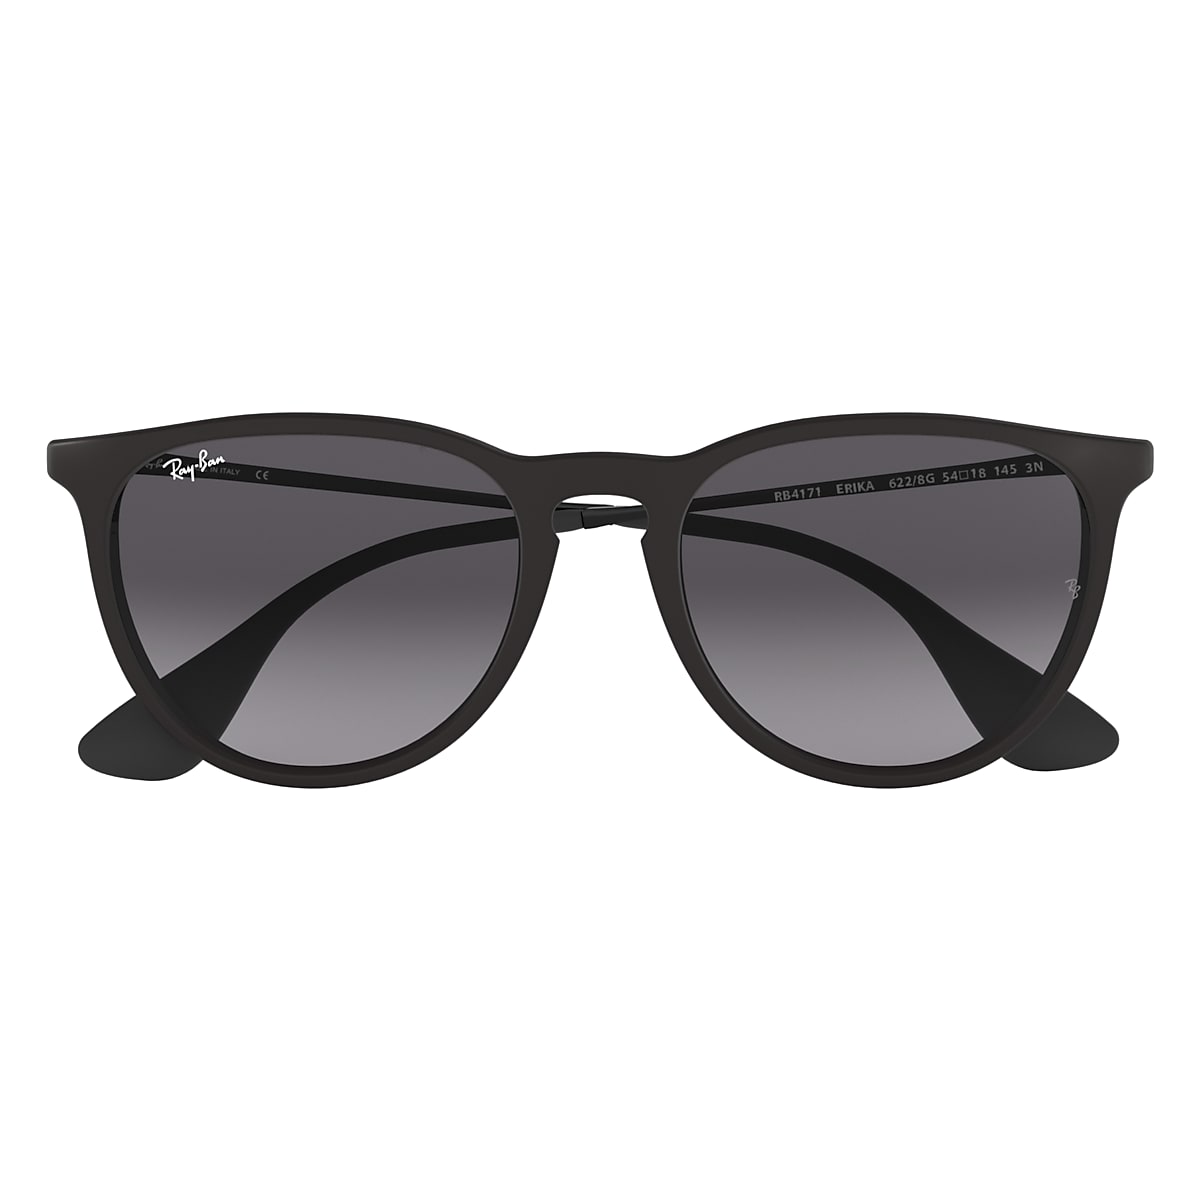 ERIKA CLASSIC Sunglasses in Black and Grey - RB4171 | Ray-Ban® US